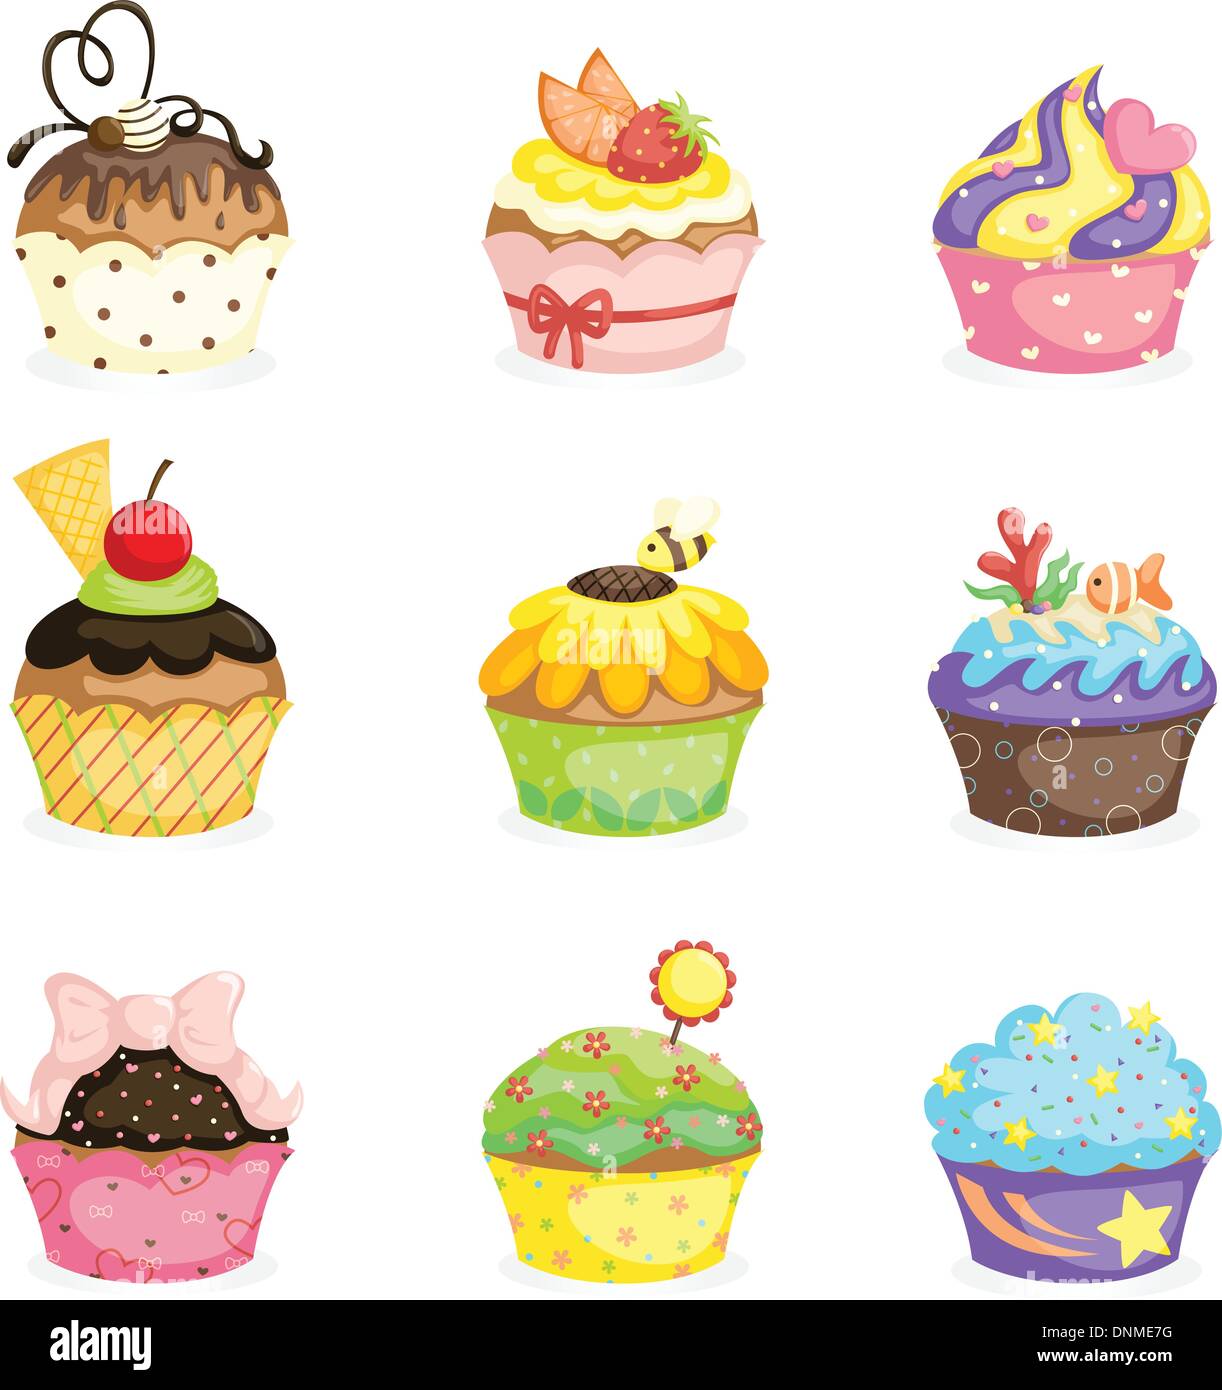 A vector illustration of different cupcakes designs Stock Vector